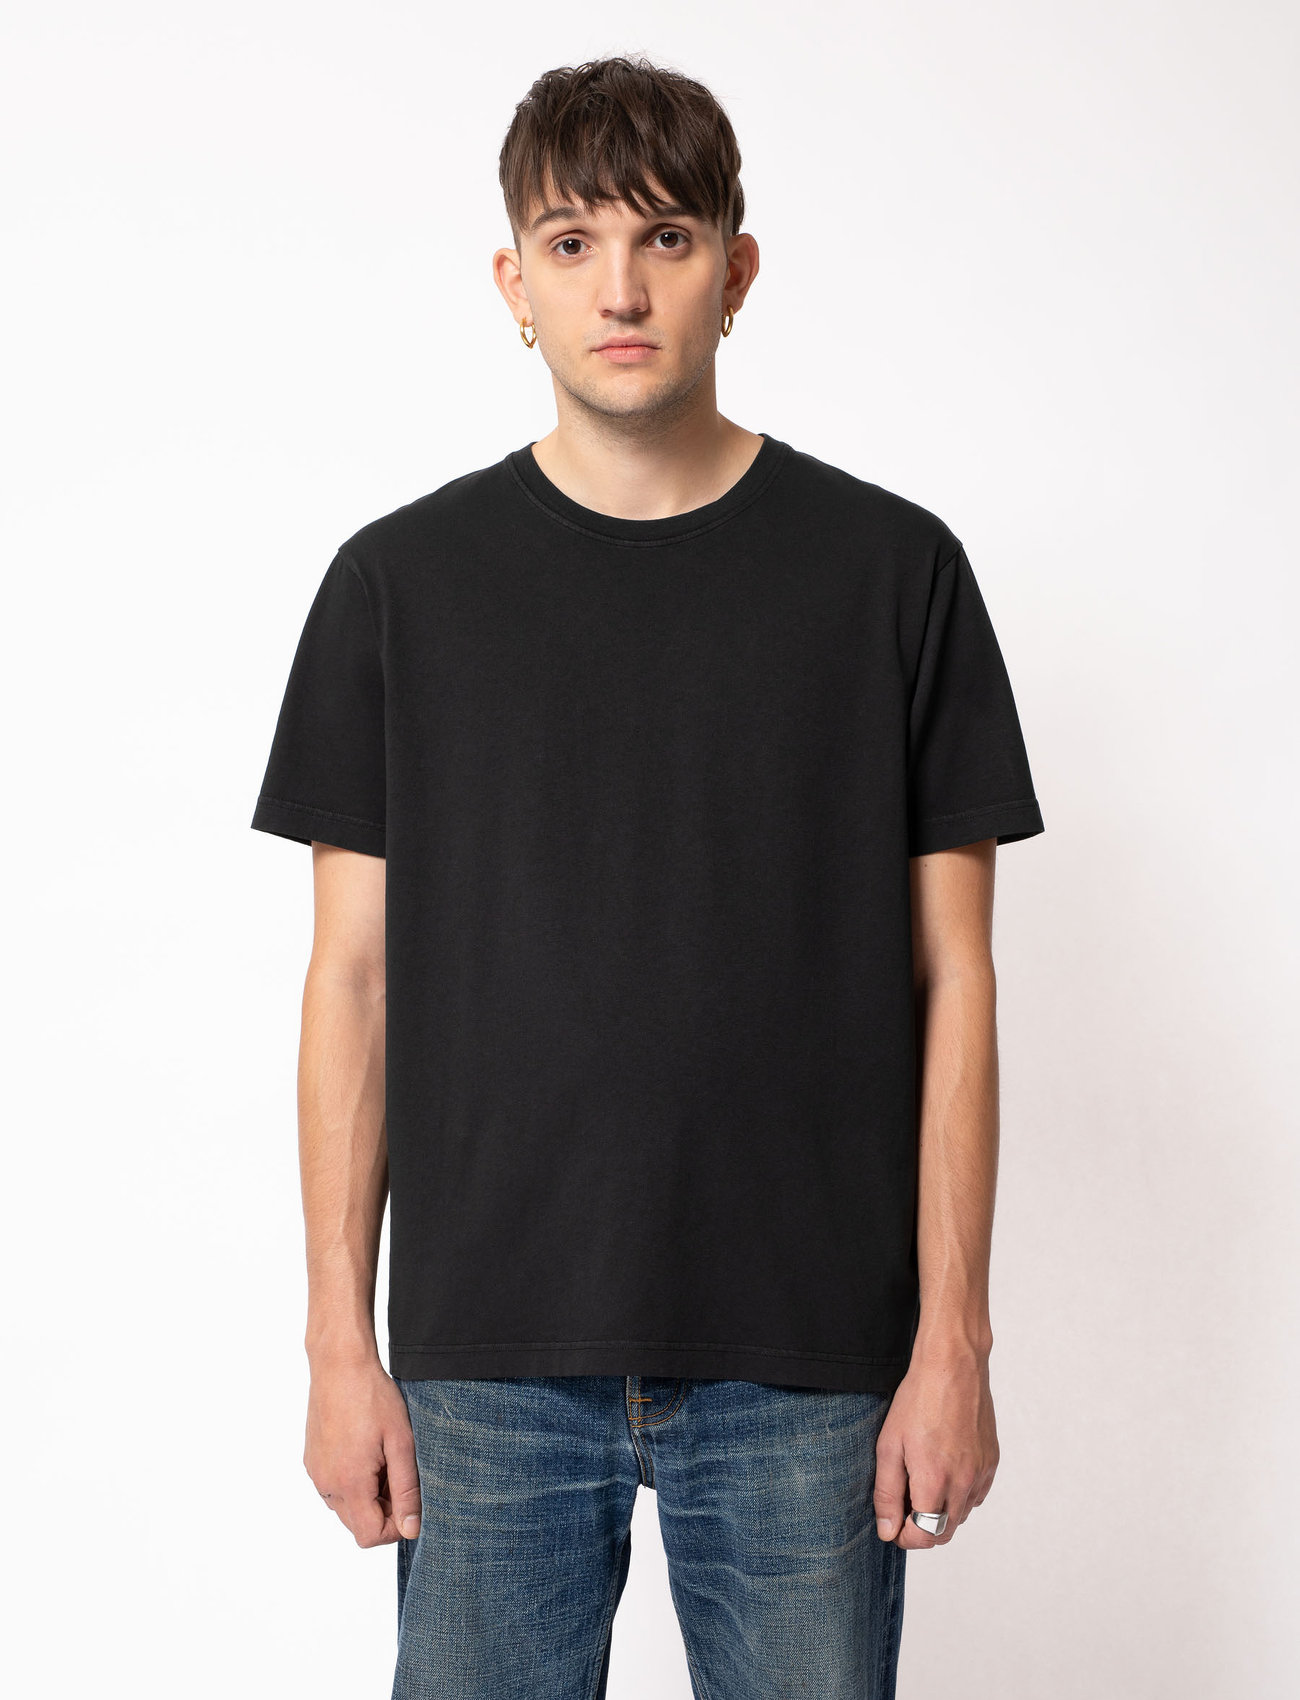 Nudie Jeans - Uno Everyday Tee Black - t-shirts à manches courtes - black - 0